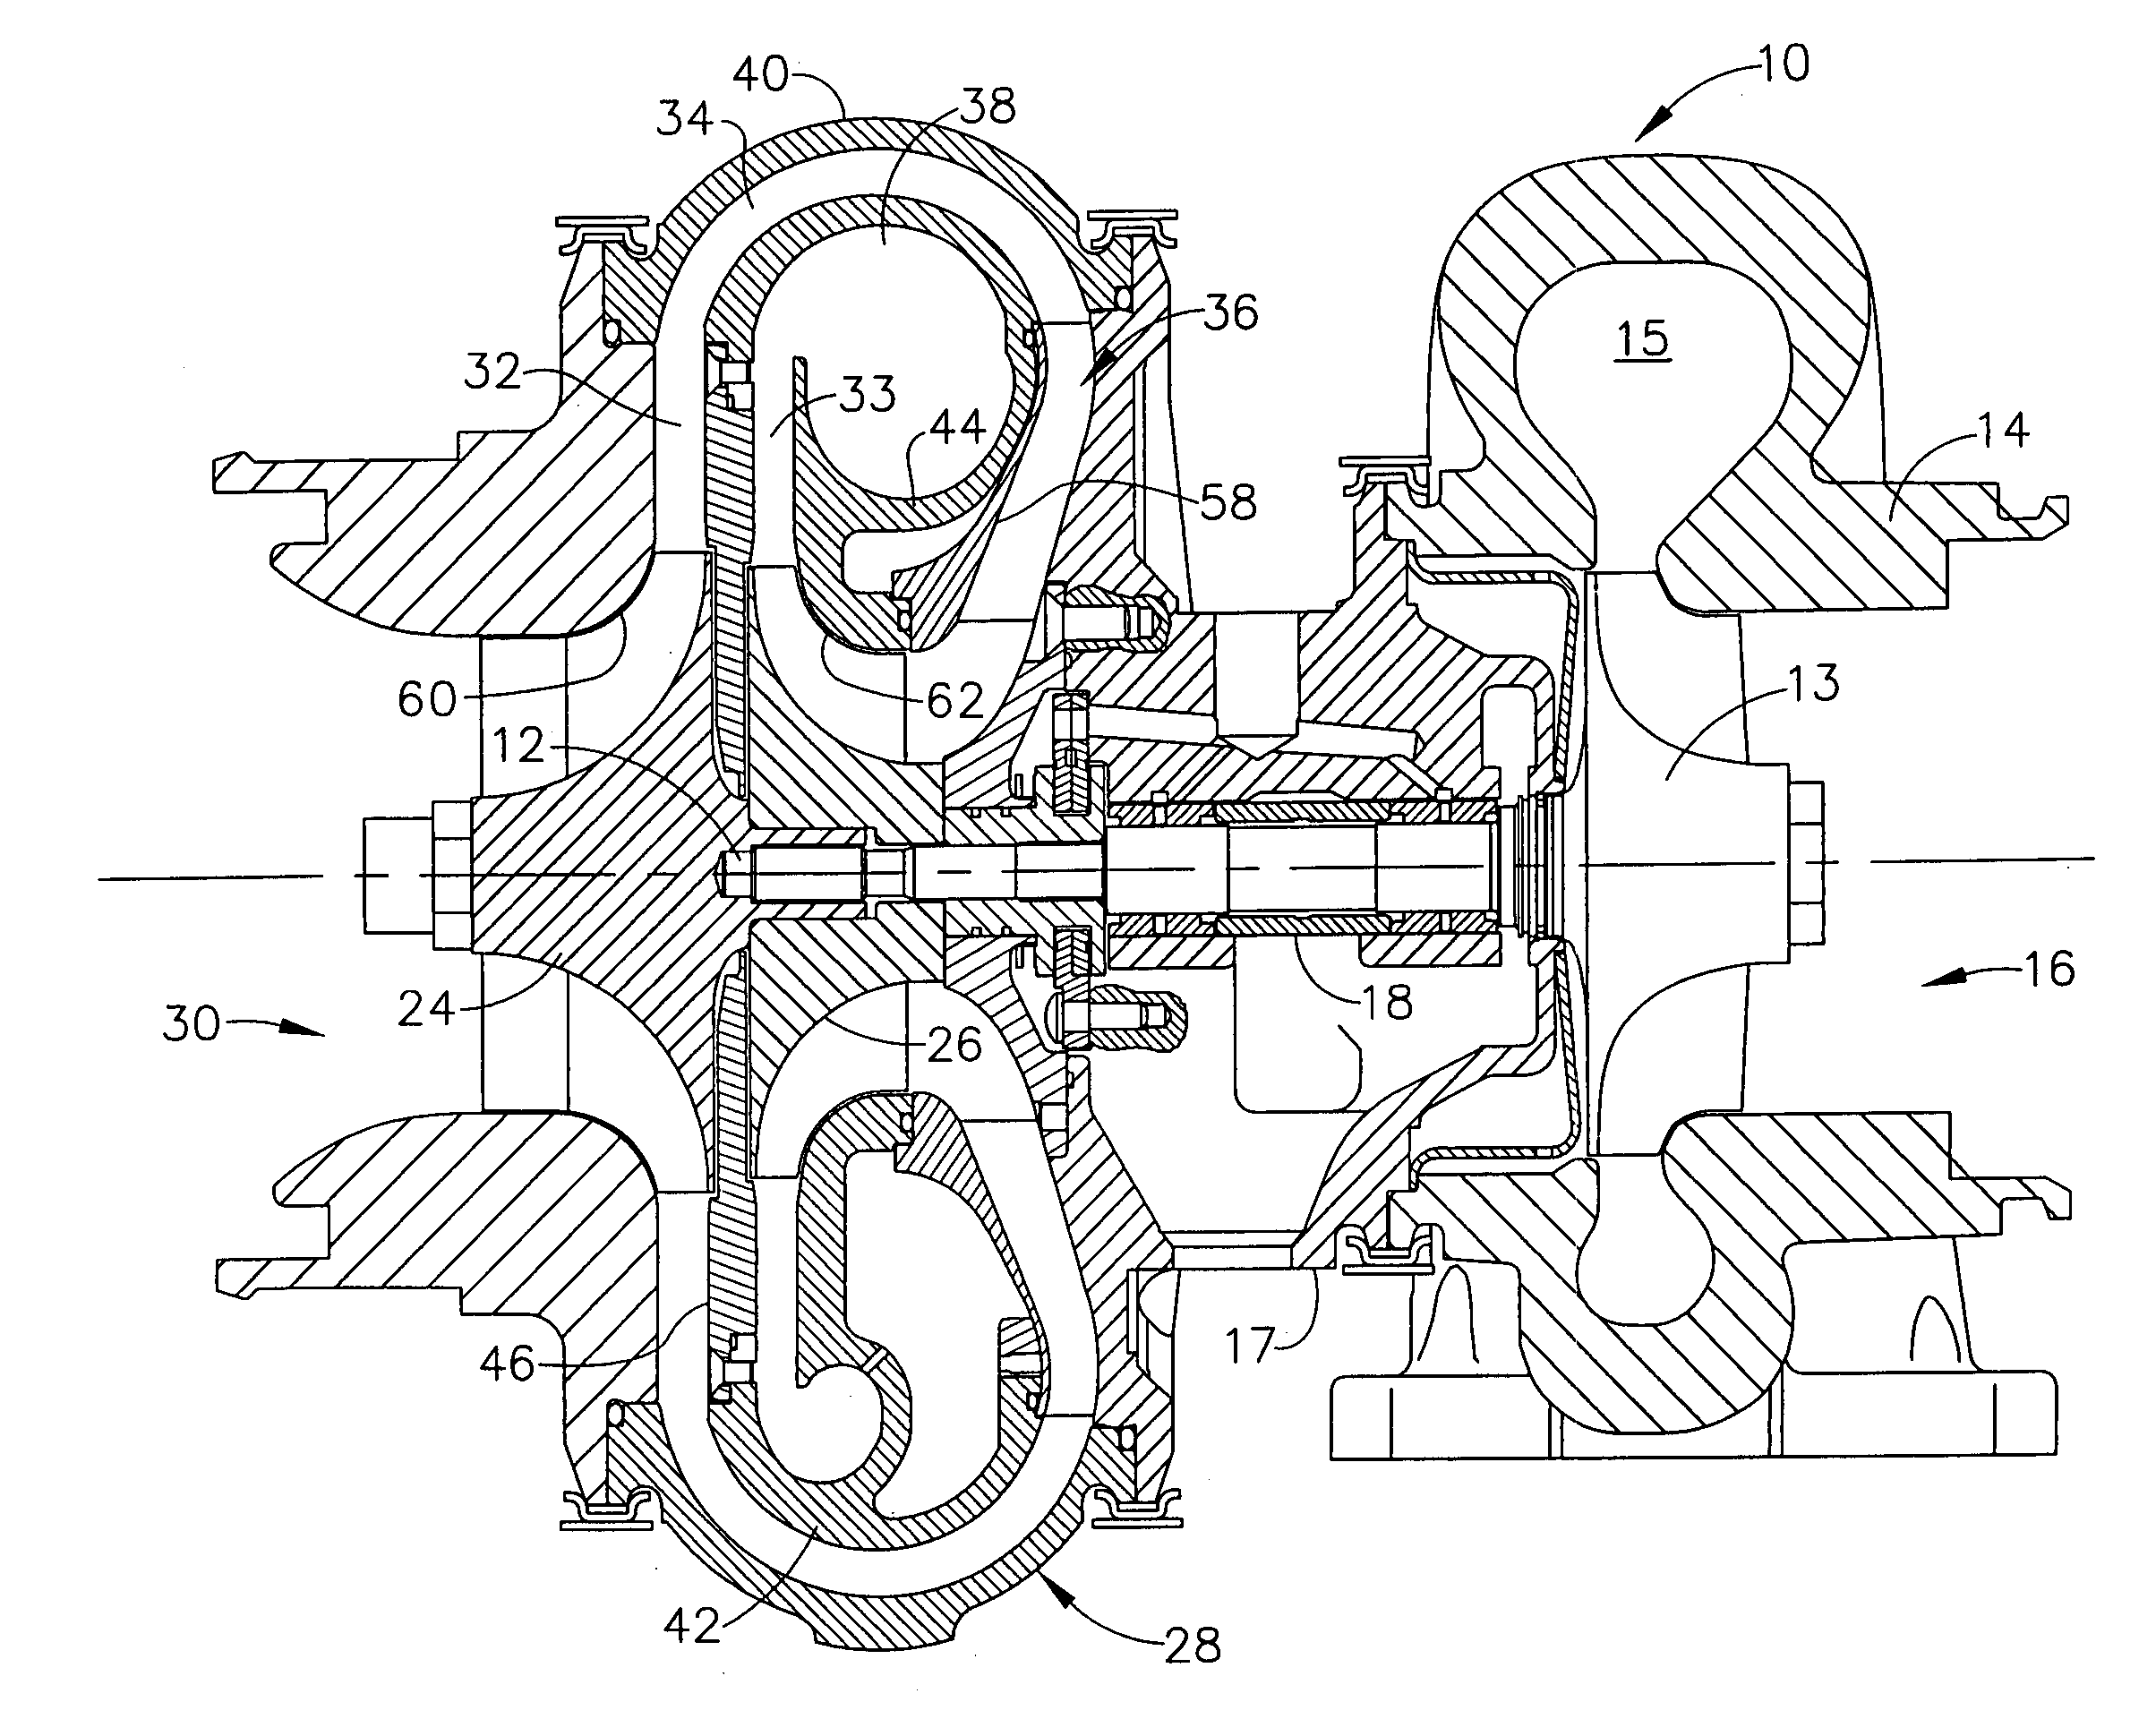 Turbocharger having two-stage compressor with boreless first-stage impeller